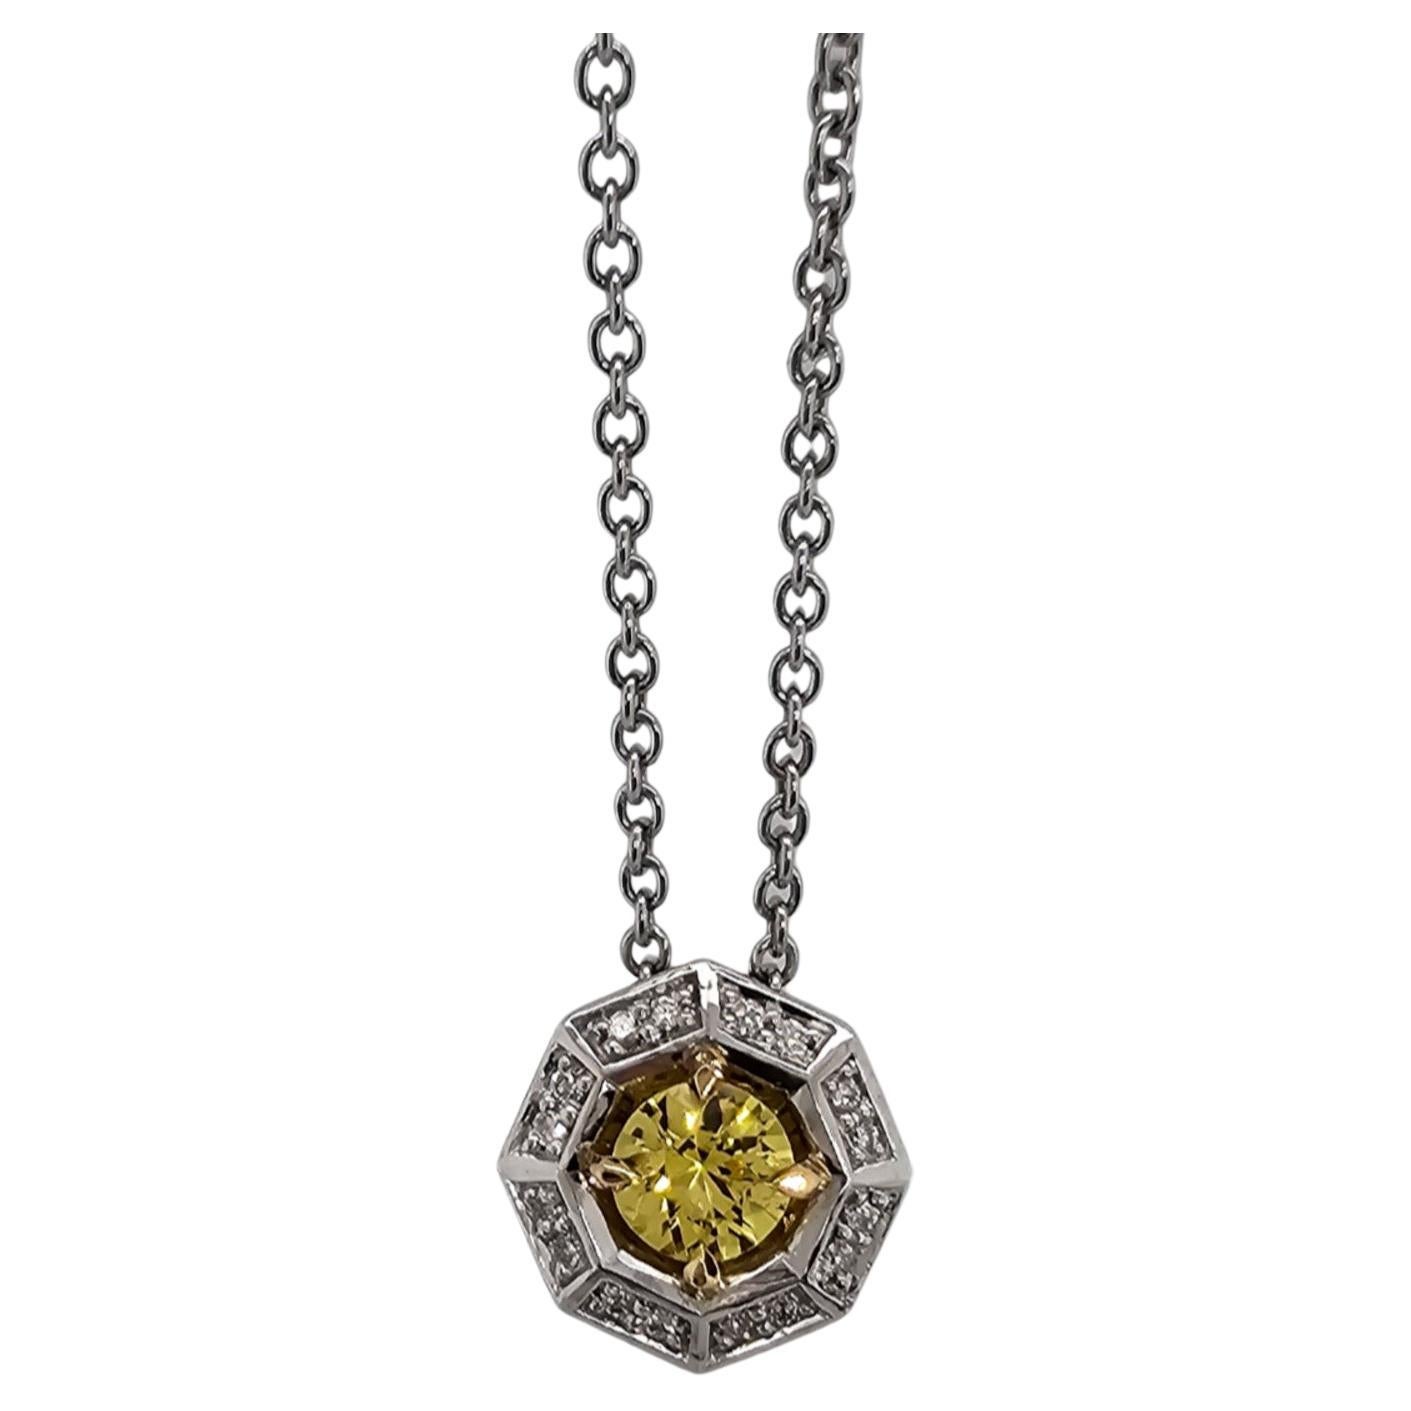 18ct White Gold Necklace "Sunbust" For Sale